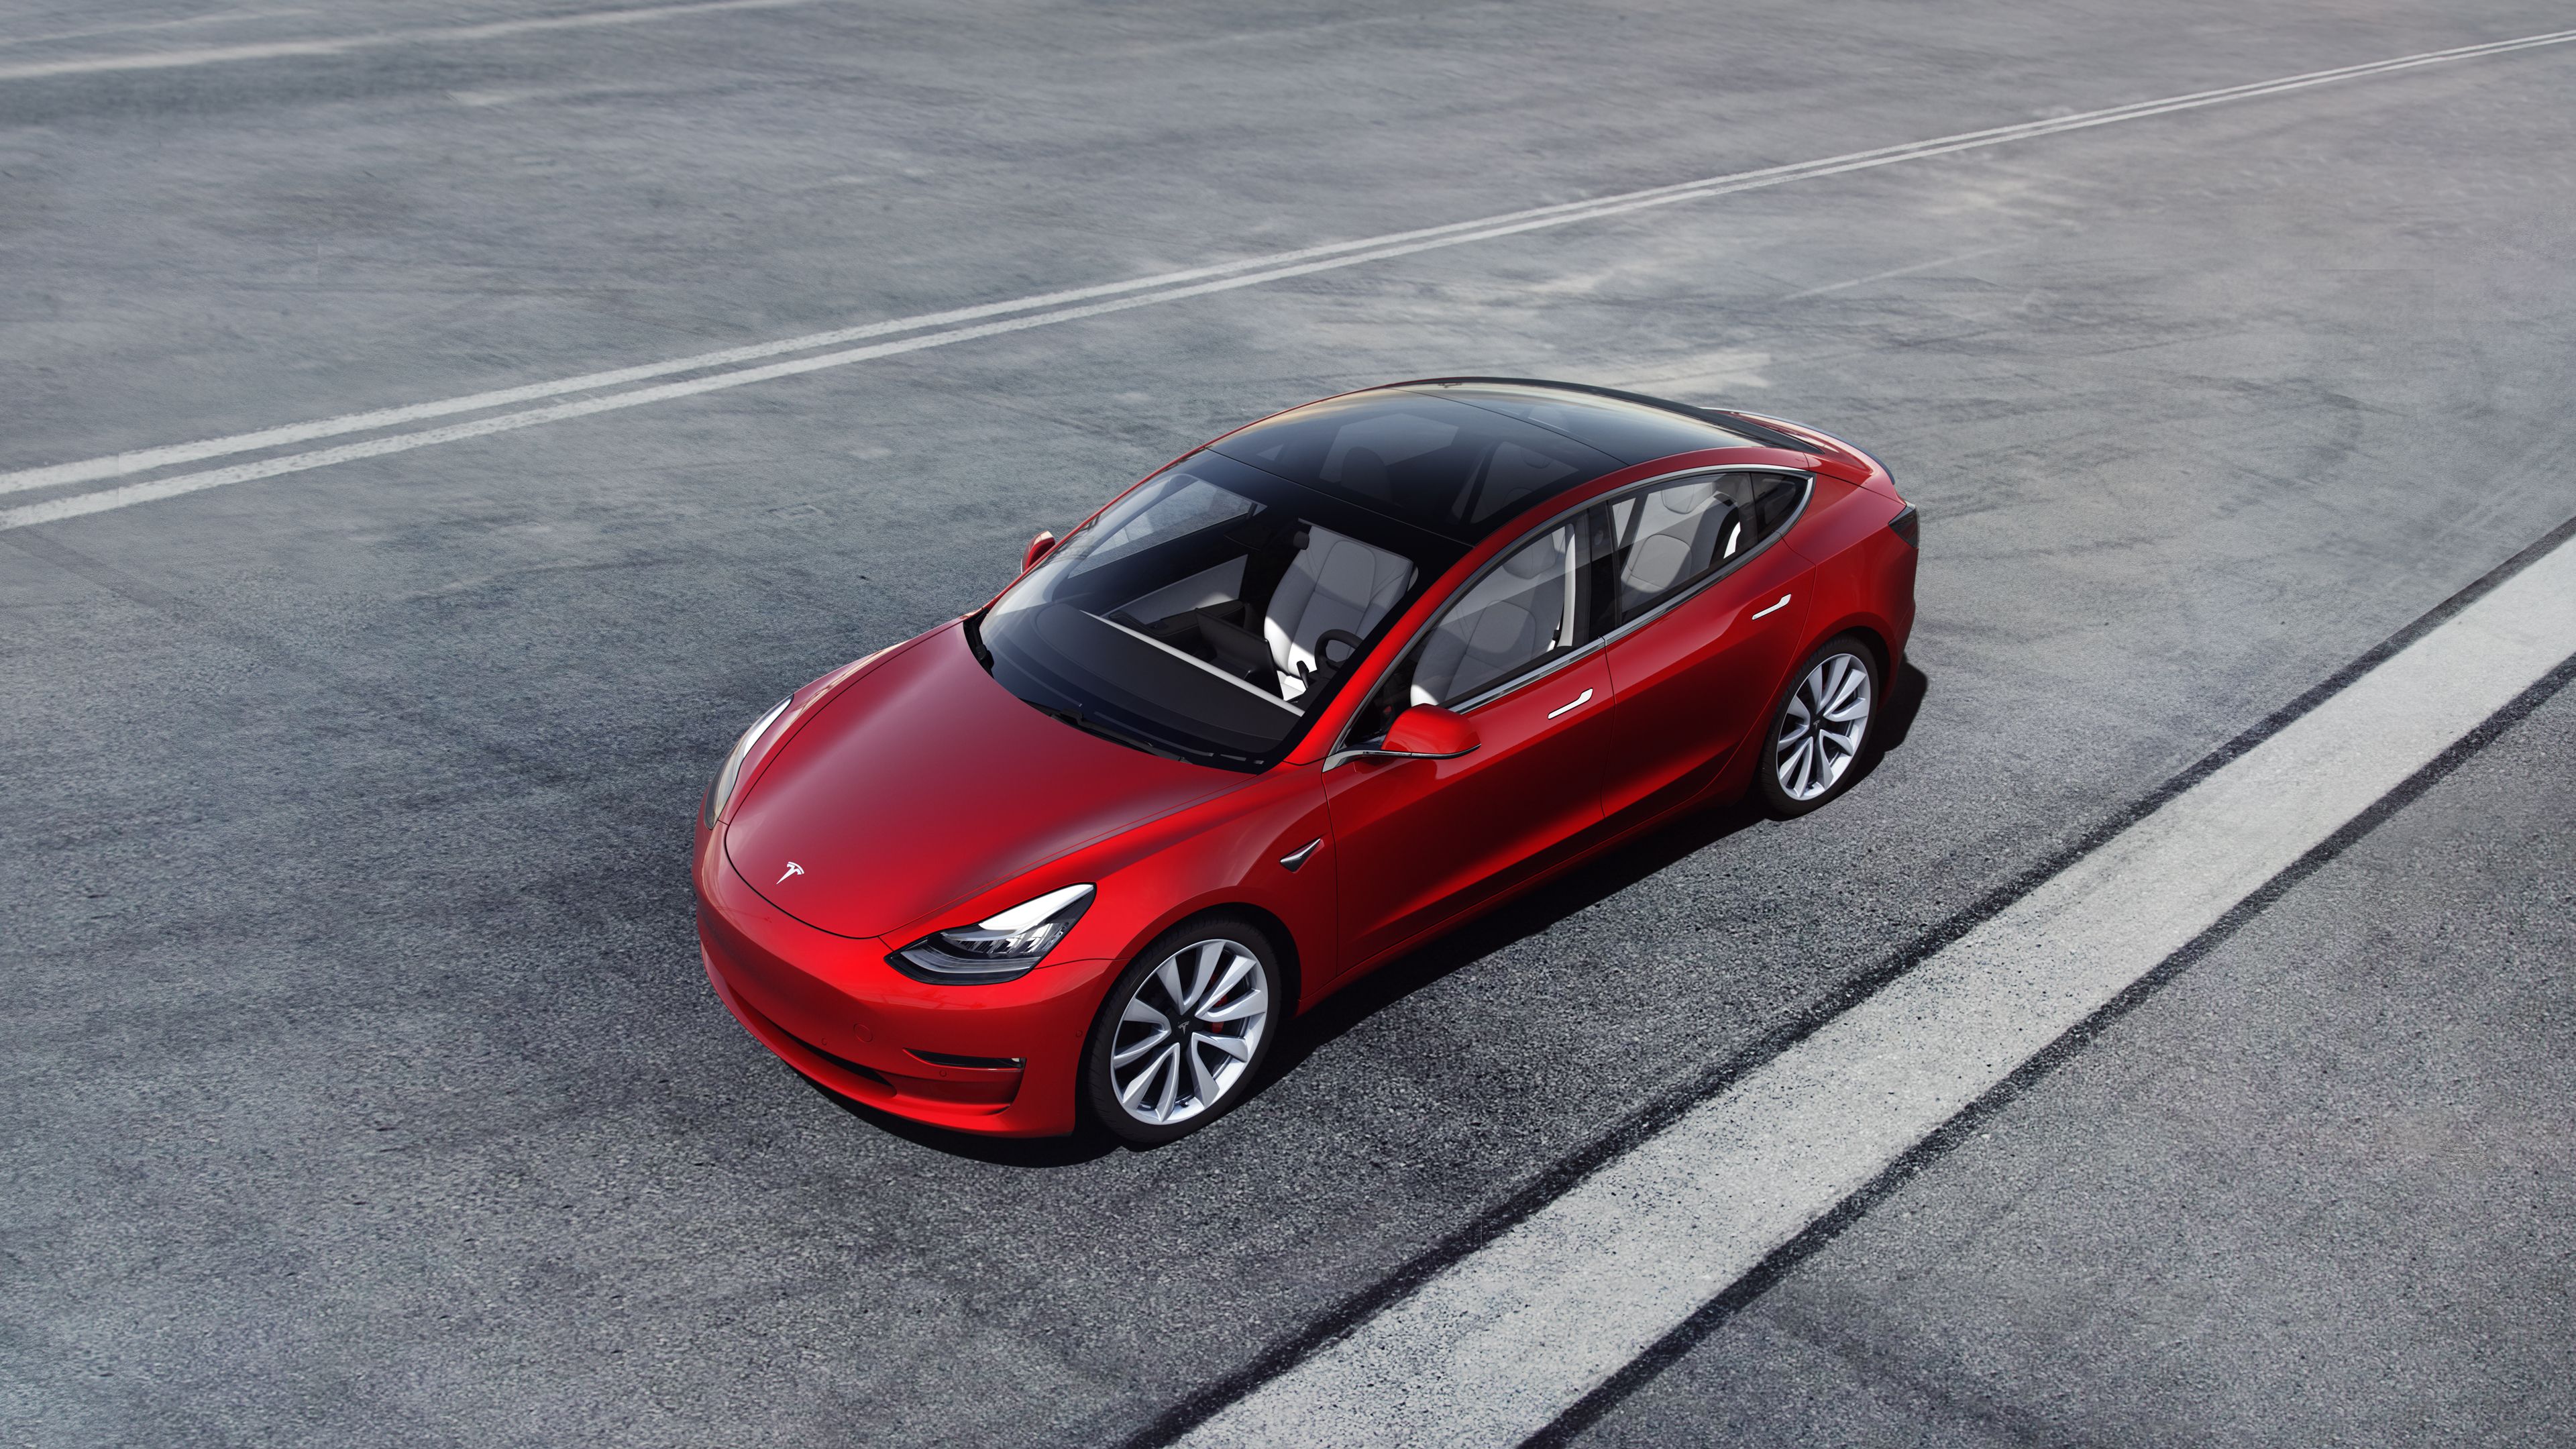 2020 - 2021 Tesla Model 3 Owners Had a Very Nice Labor Day Gift from Tesla This Year